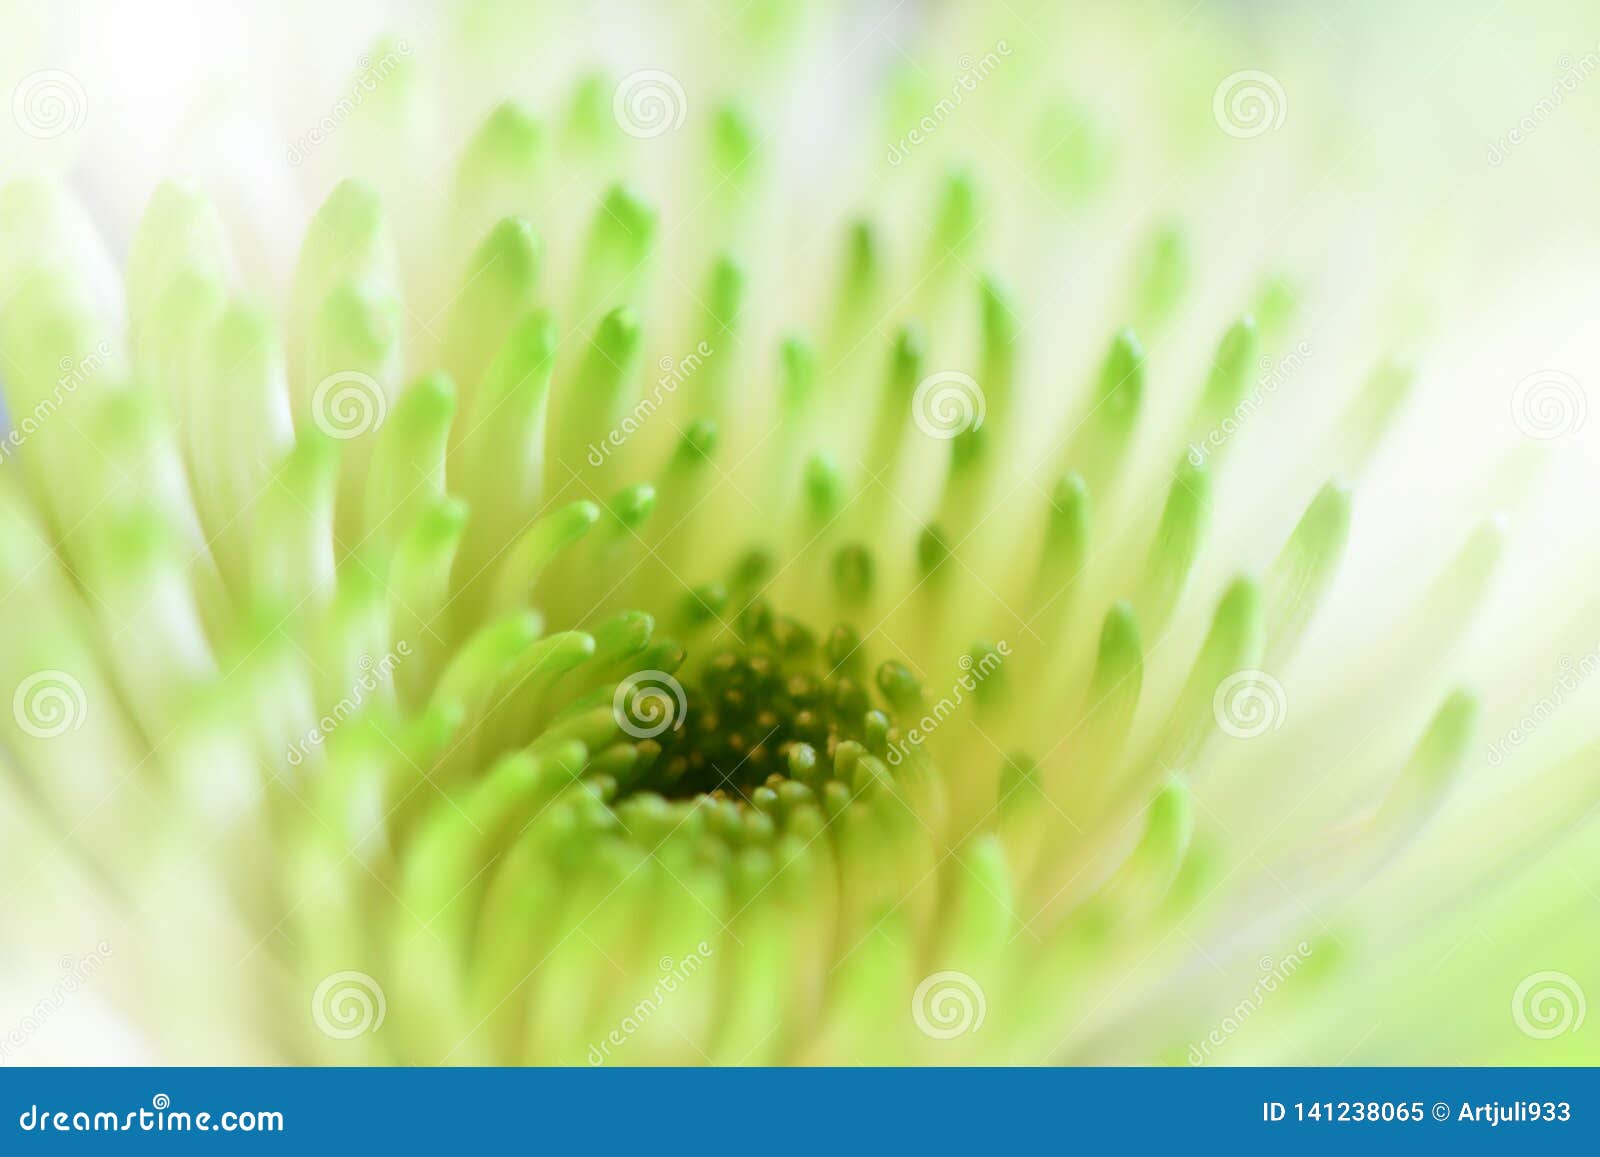 Beautiful Green Nature ,   Abstract   Energy of Plant. Stock Image - Image  of artistic, creative: 141238065